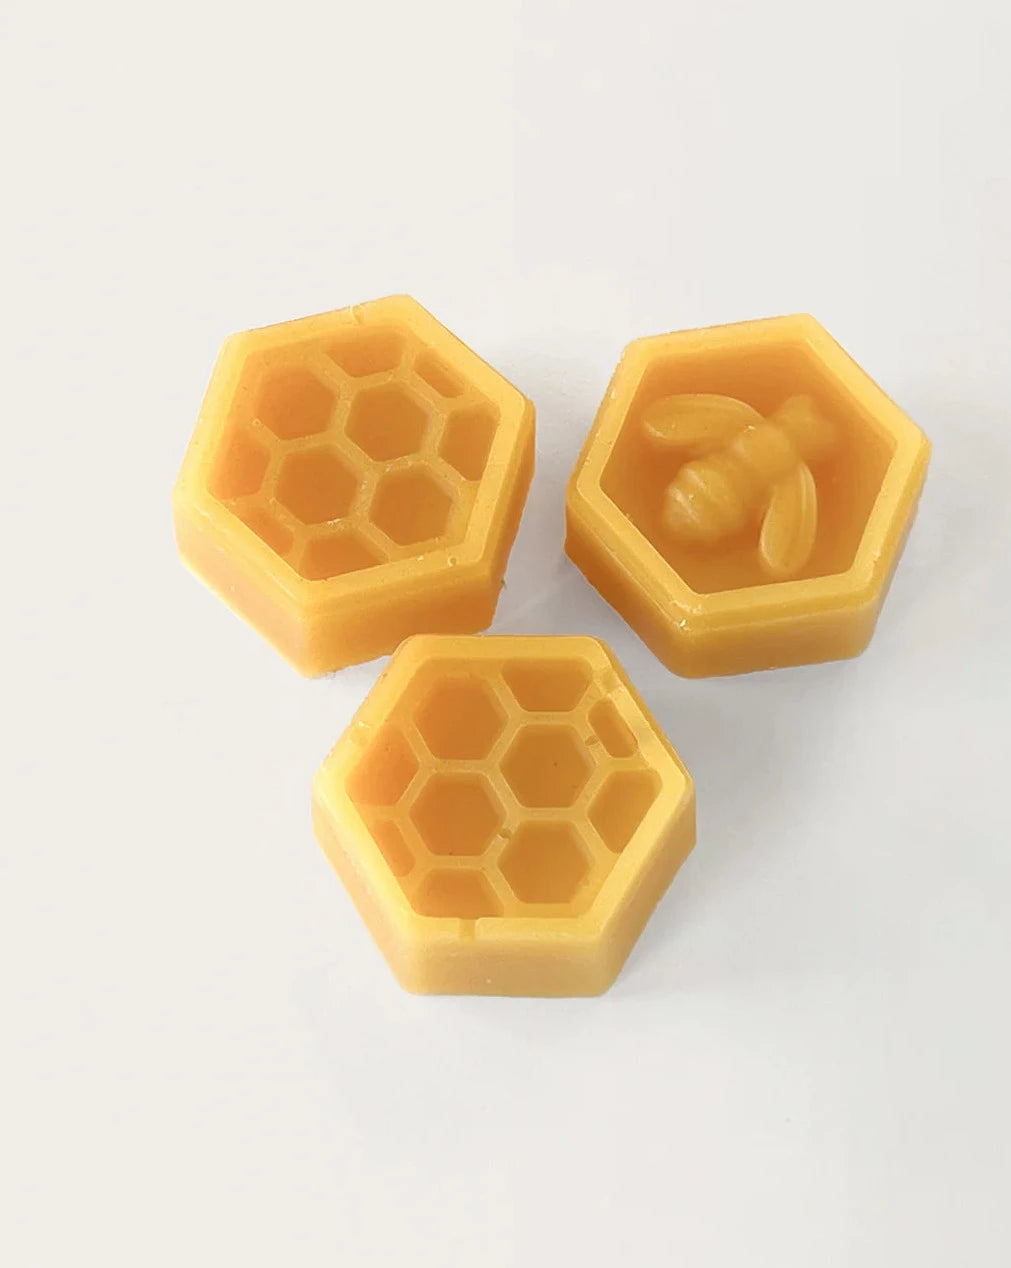 Beeswax - Re-impregnation kit